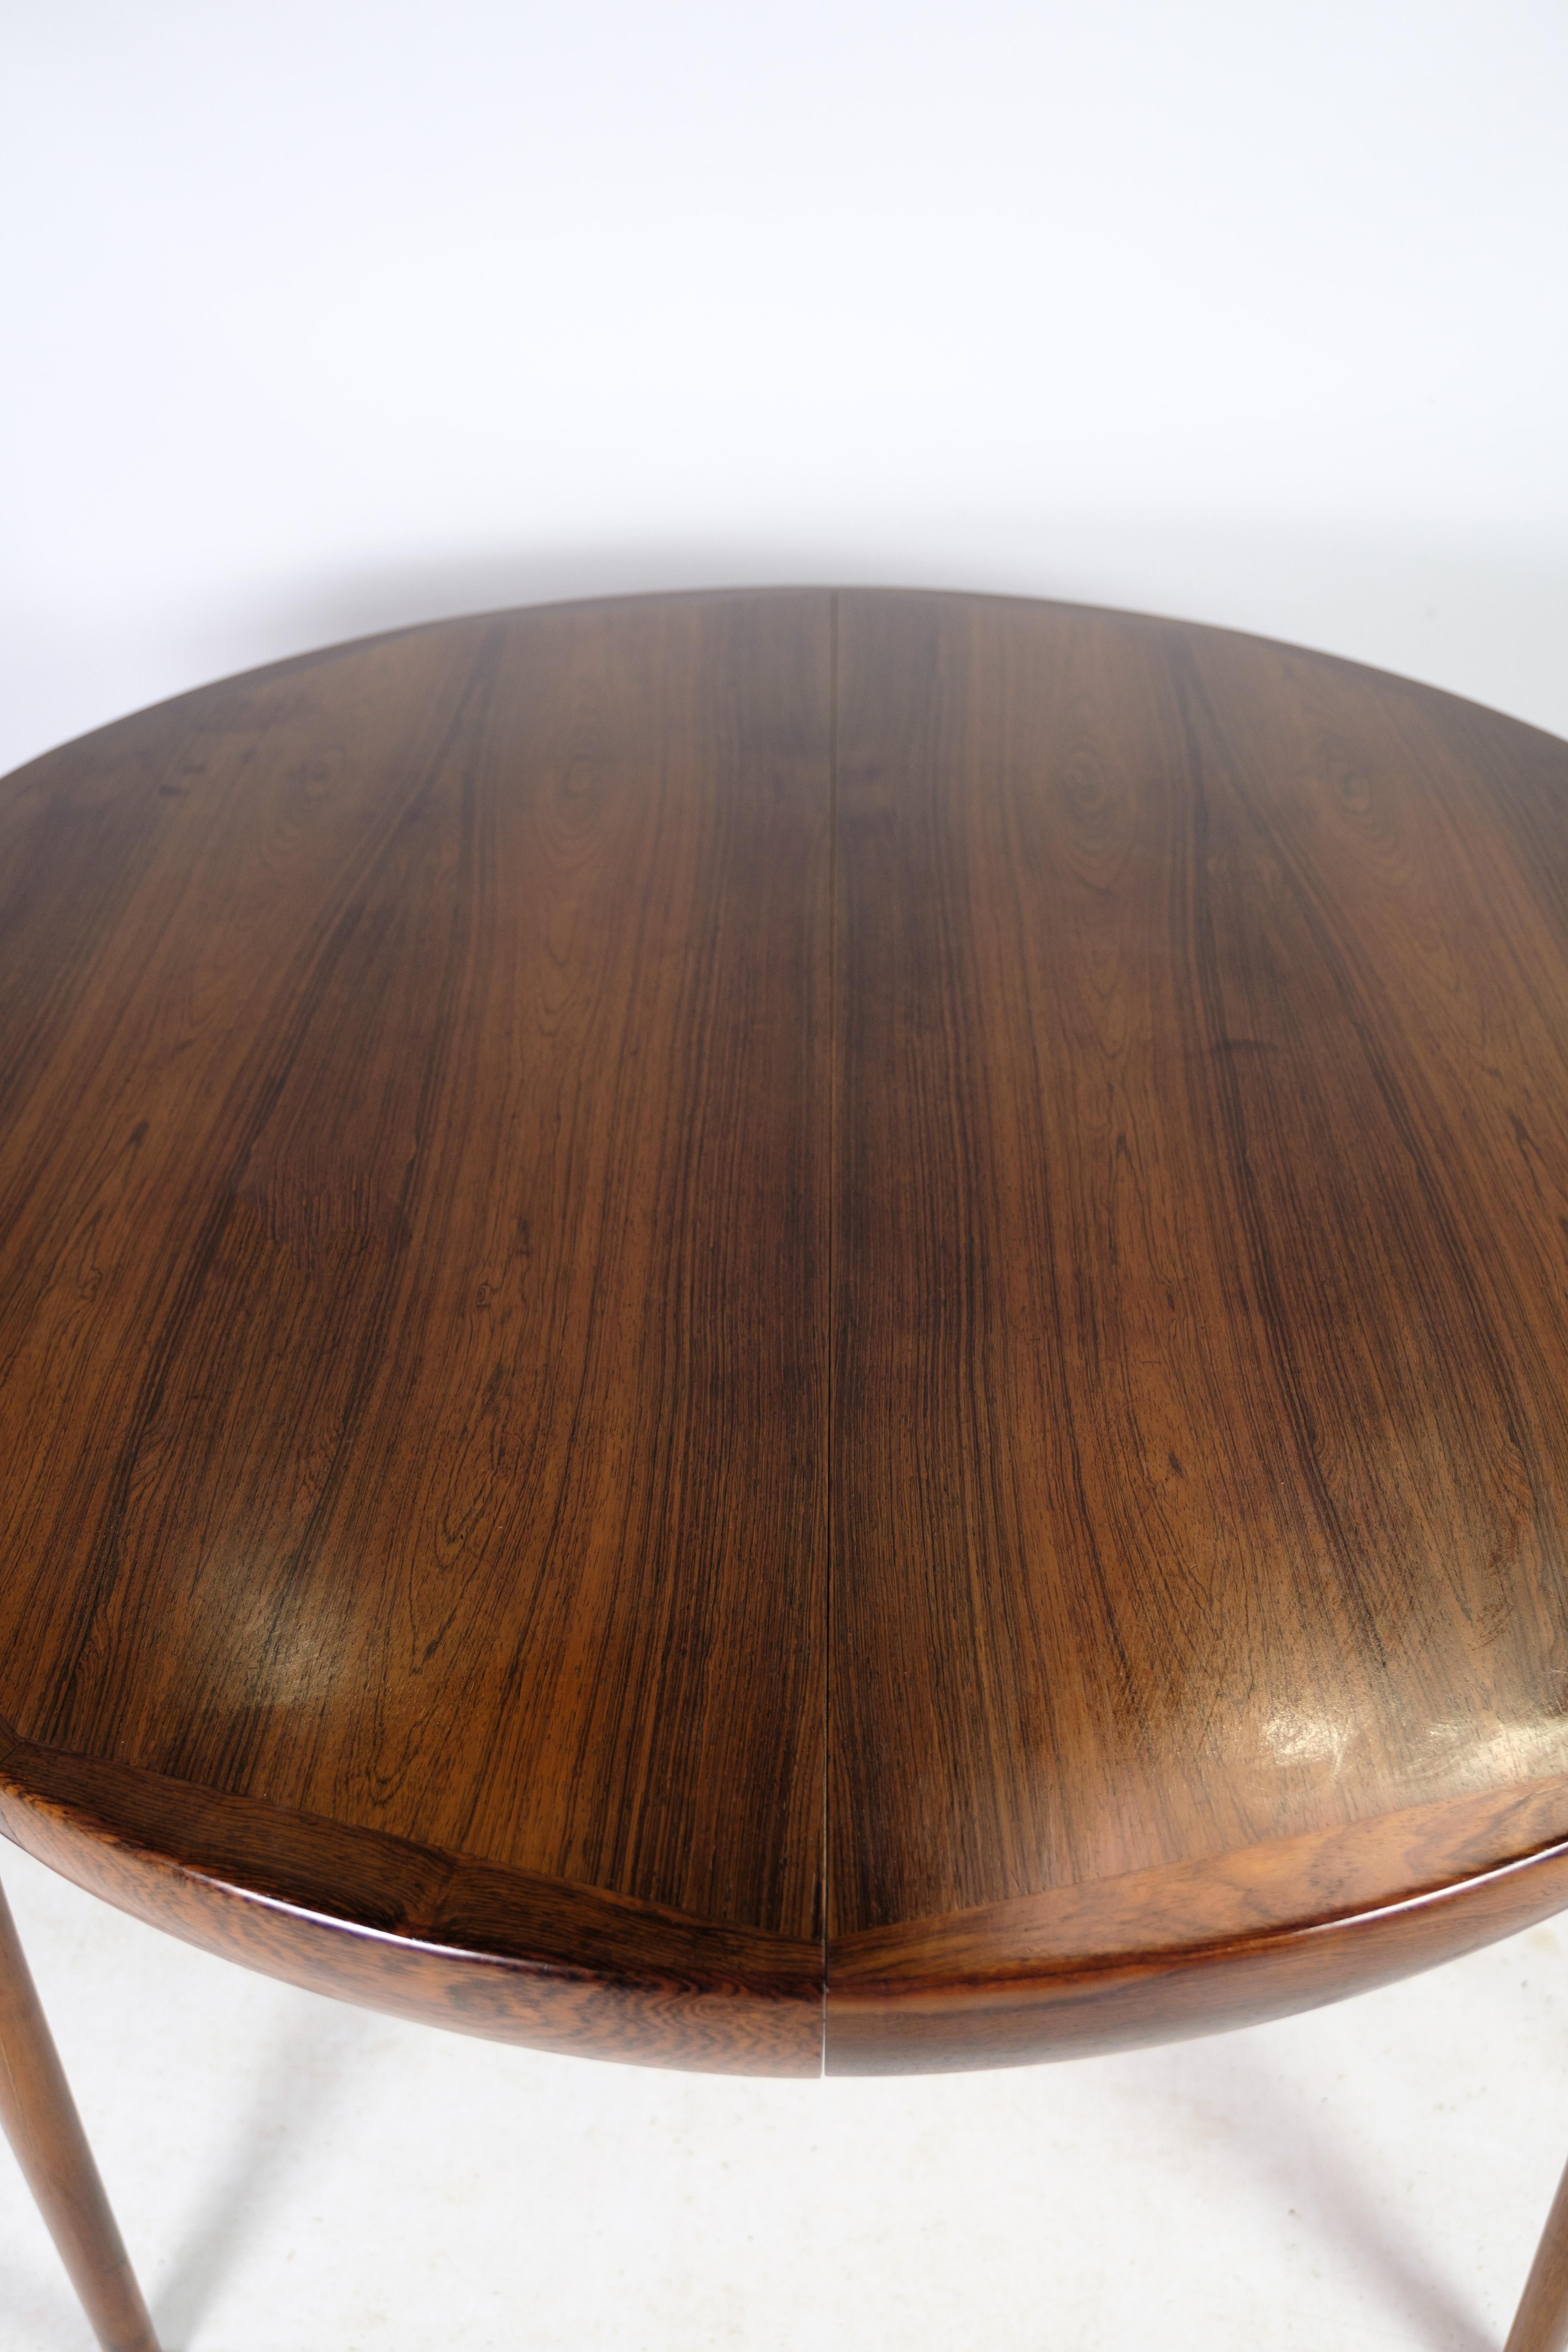 Extendable round dining table with a nice design, manufactured by Faarup Mobelfabrik in Denmark, approx. 1960. This fantastic table is made of high-quality rosewood and has three additional plates, each 50 cm. It is a beautiful Danish piece designed